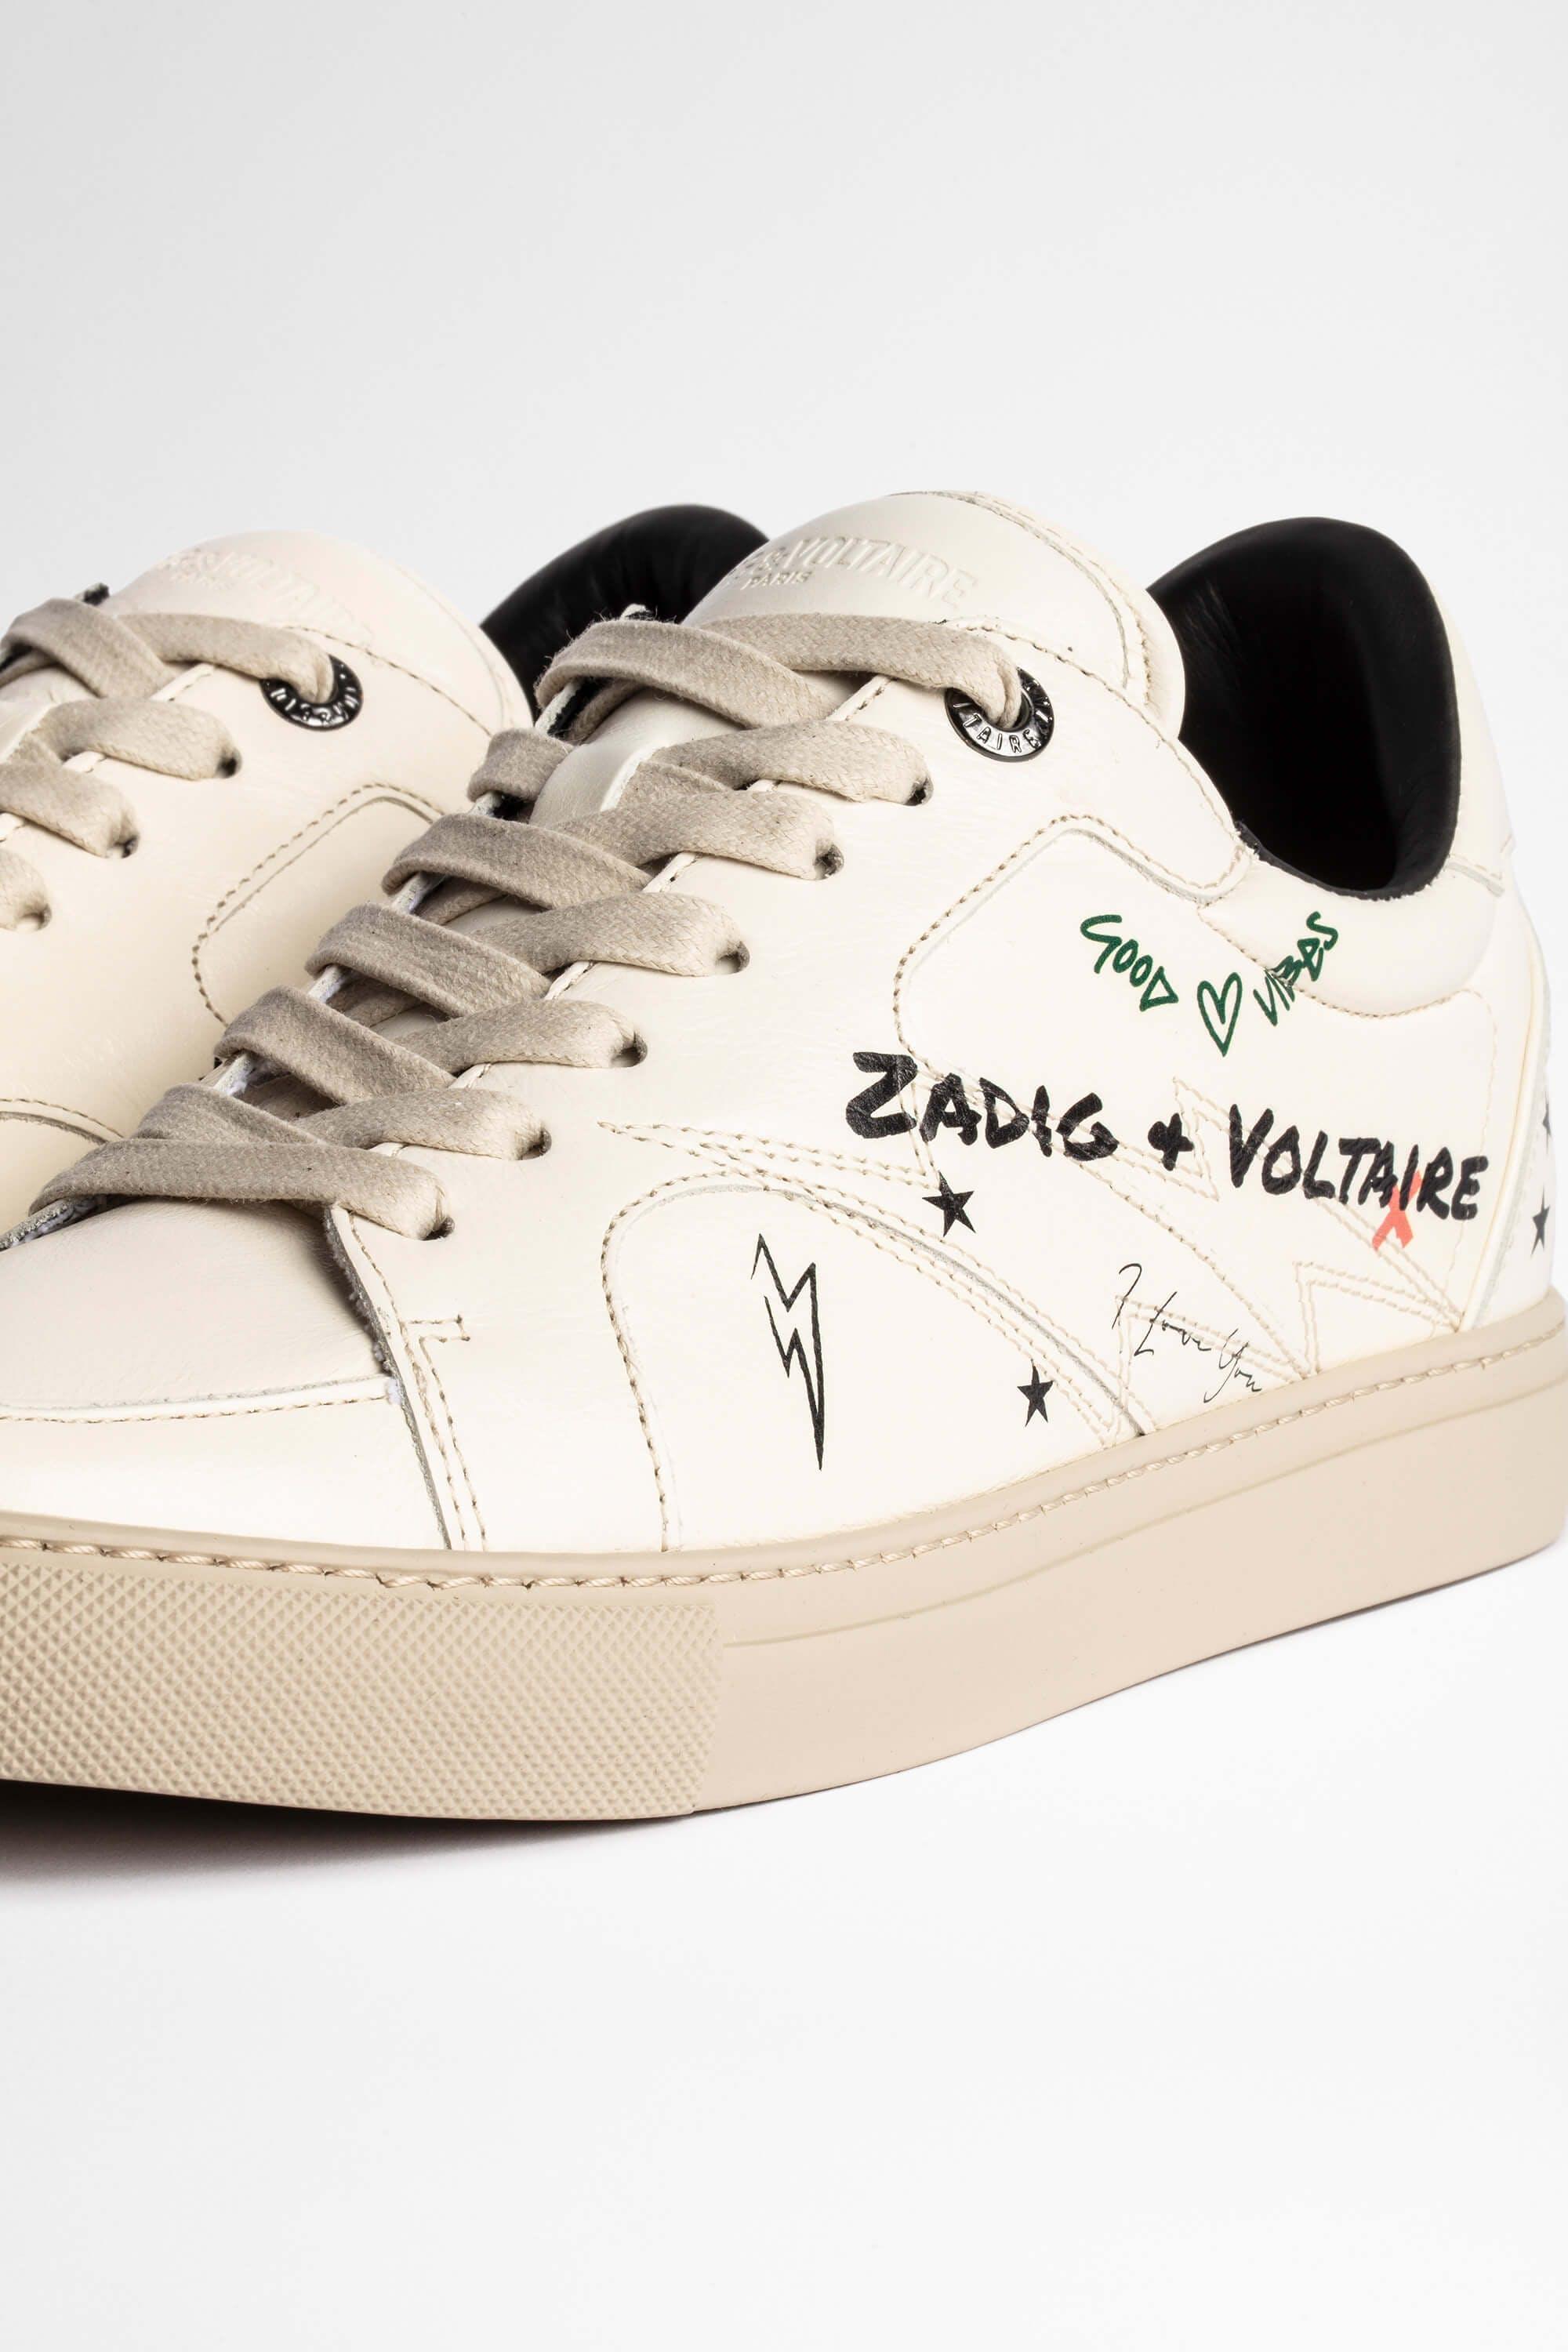 Zadig & Voltaire Zv1747 Board Crush Sneakers Leather in White